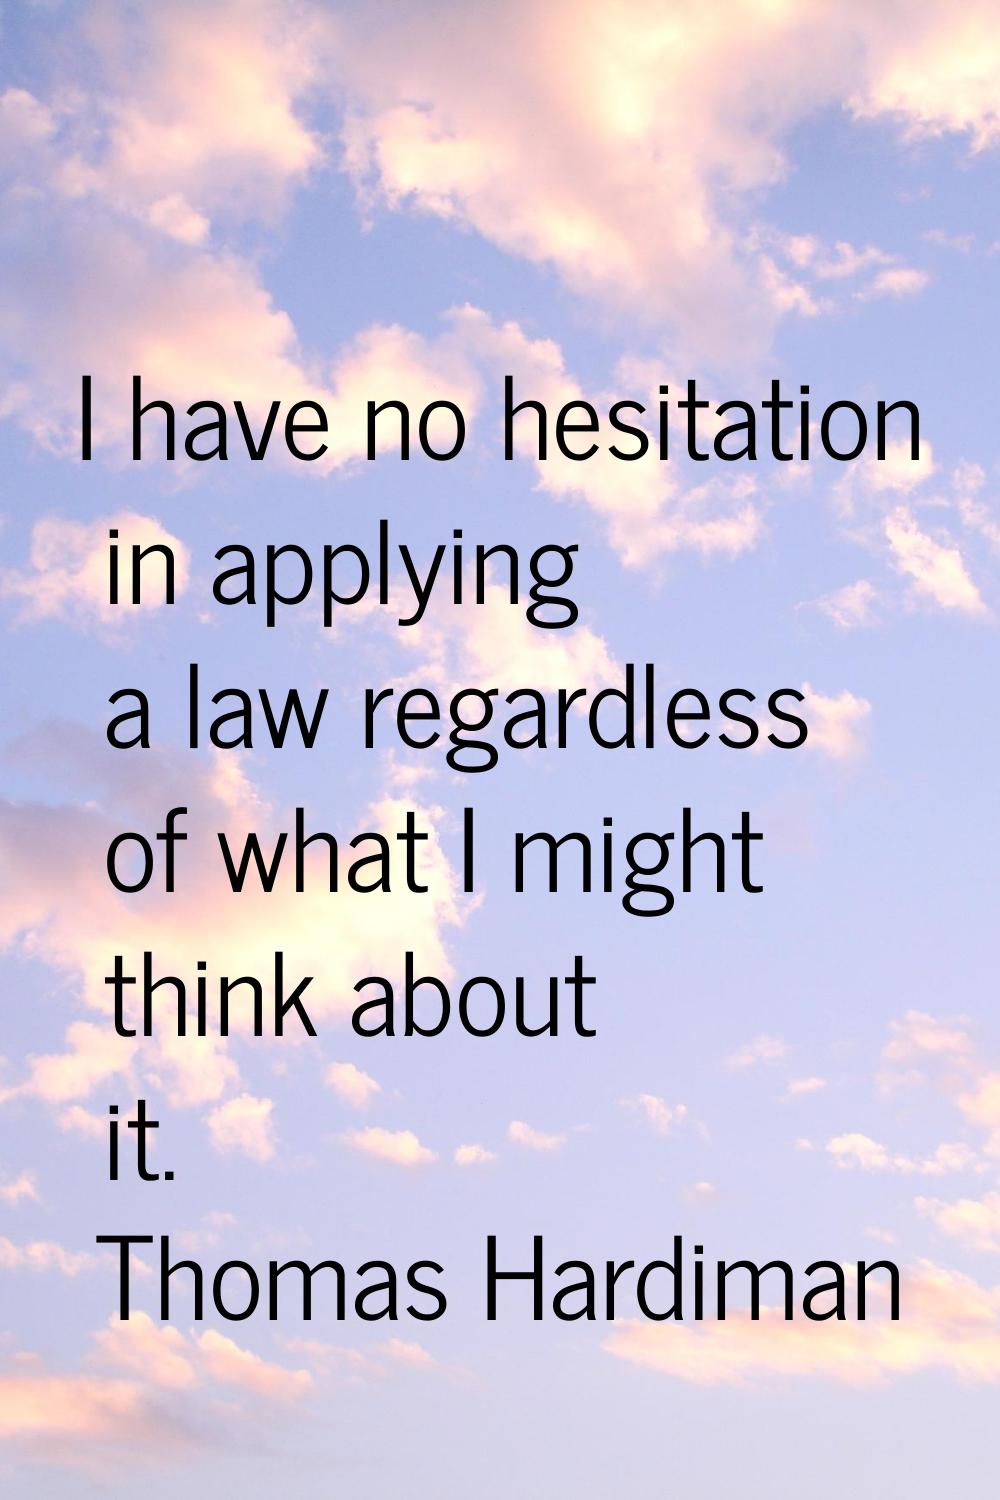 I have no hesitation in applying a law regardless of what I might think about it.